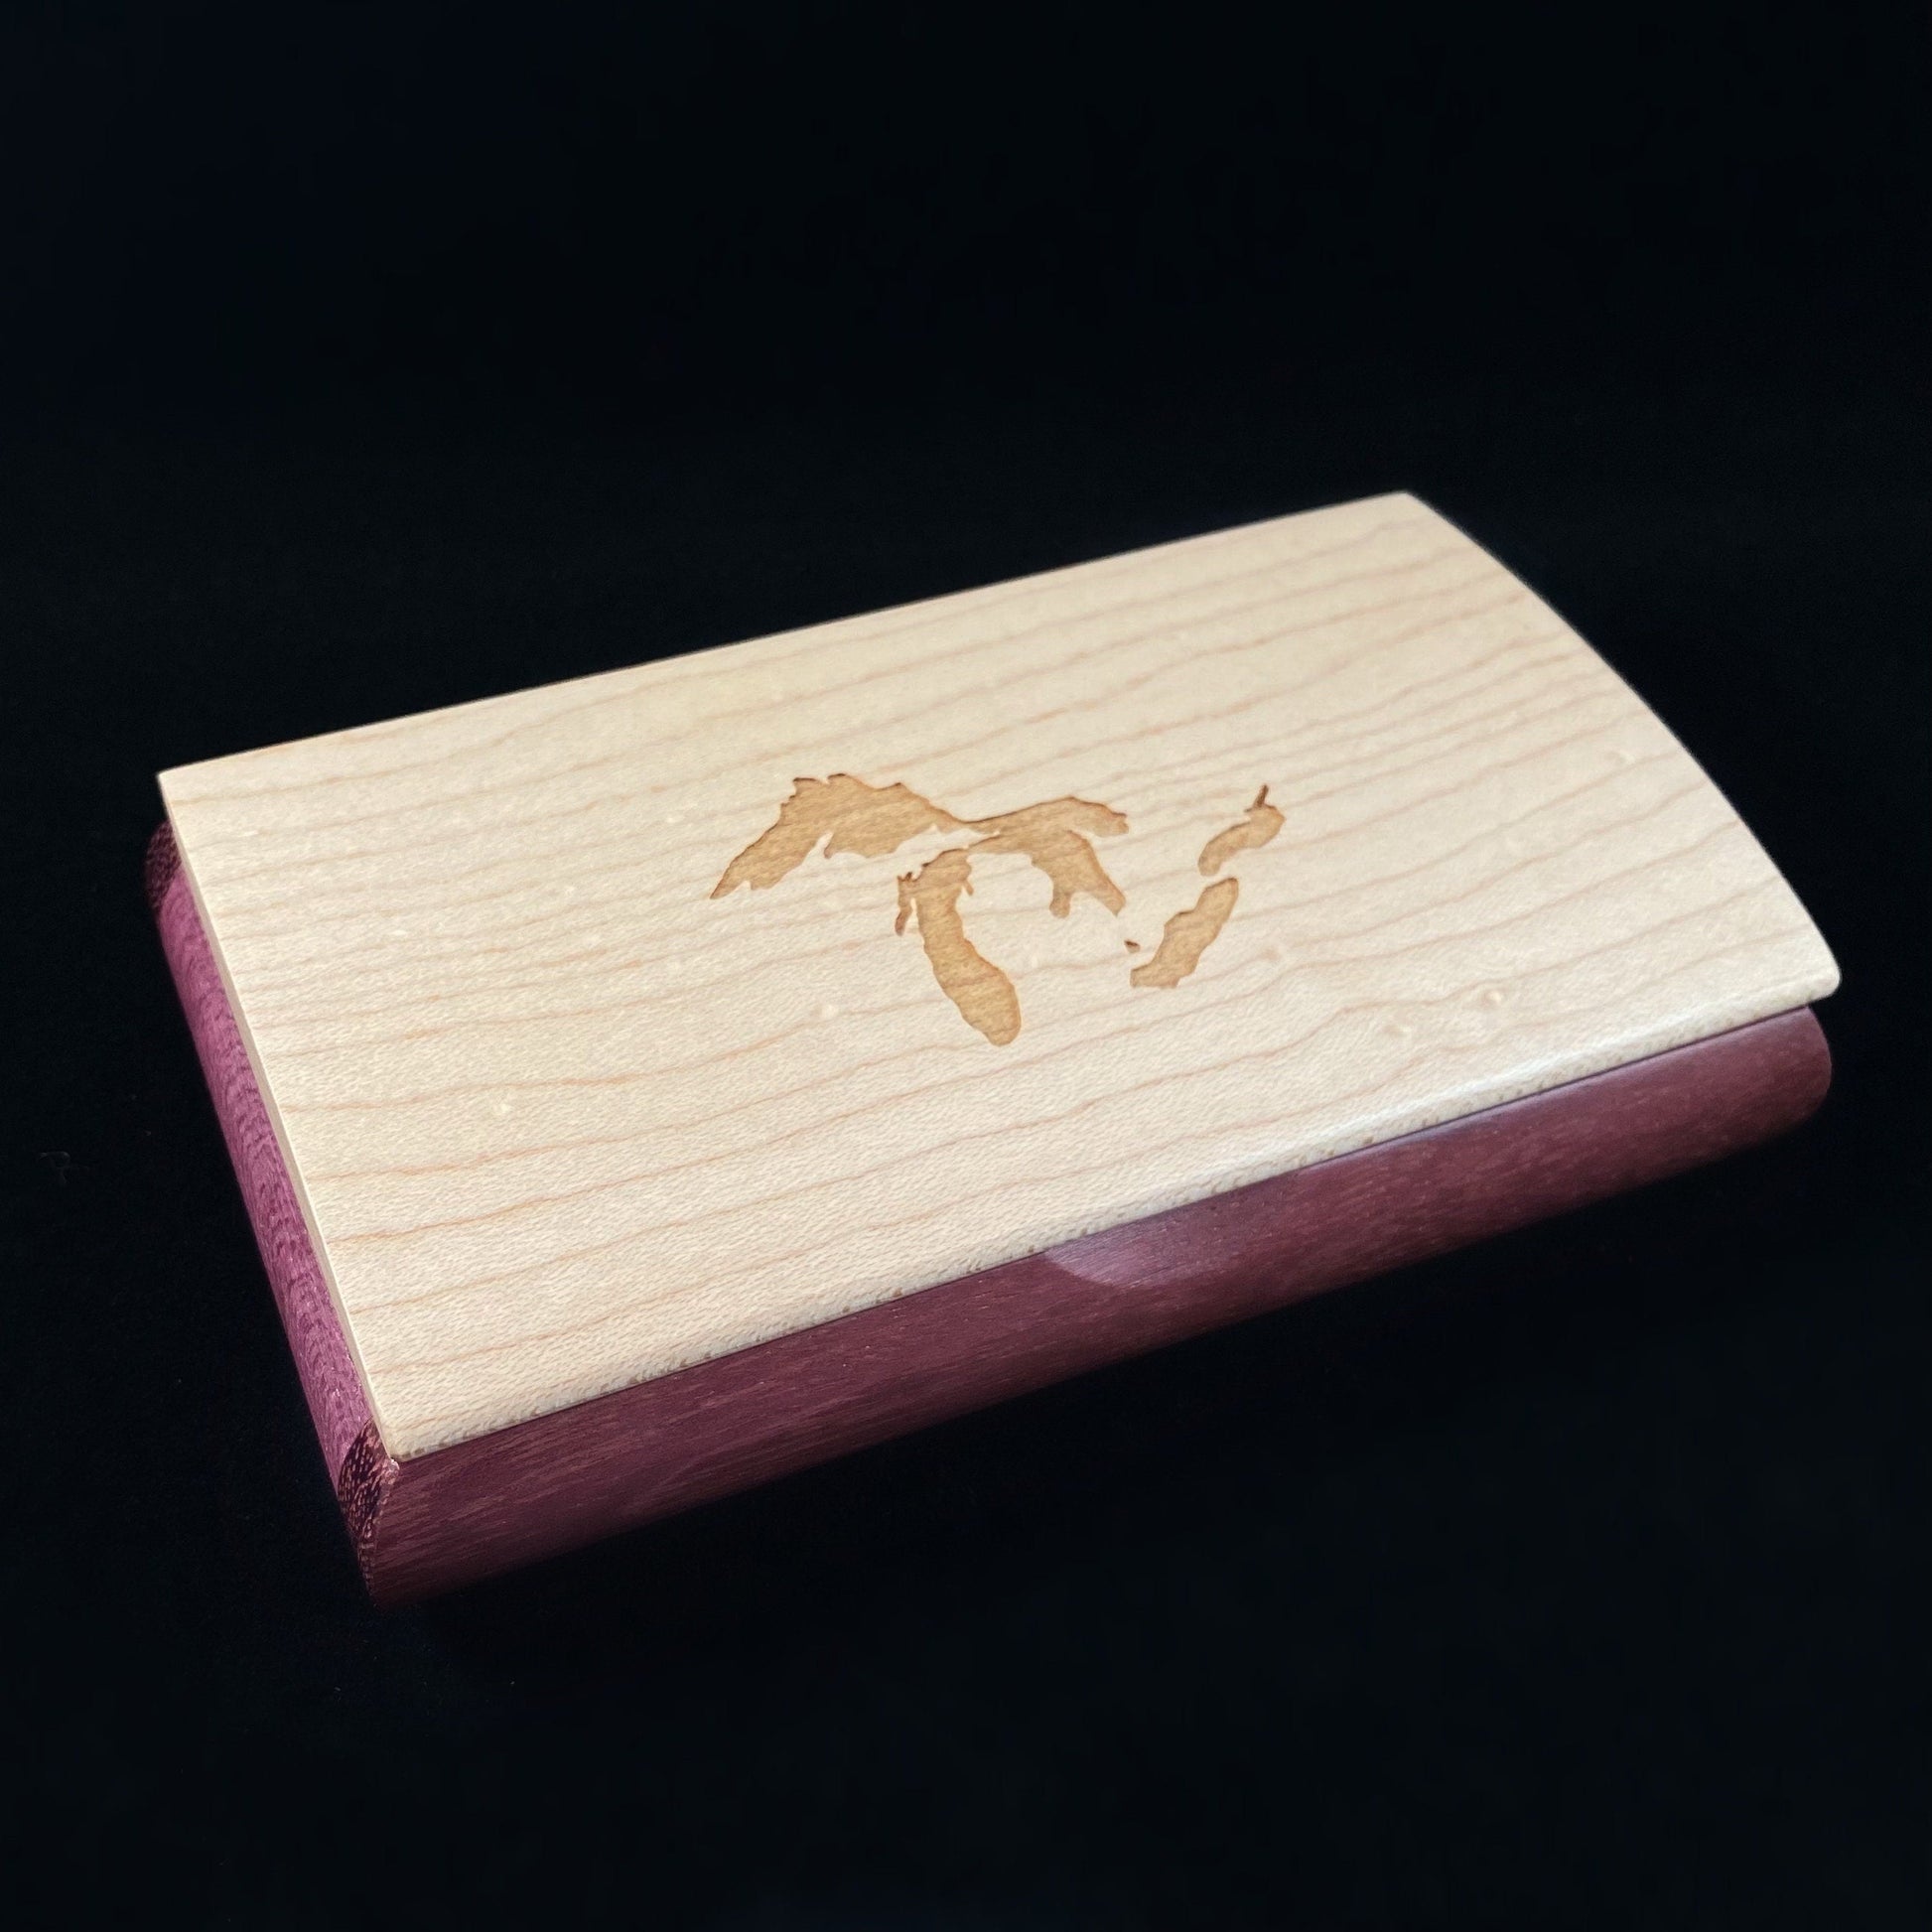 Great Lakes Handmade Wooden Box - Curly Maple and Purpleheart, Made in USA